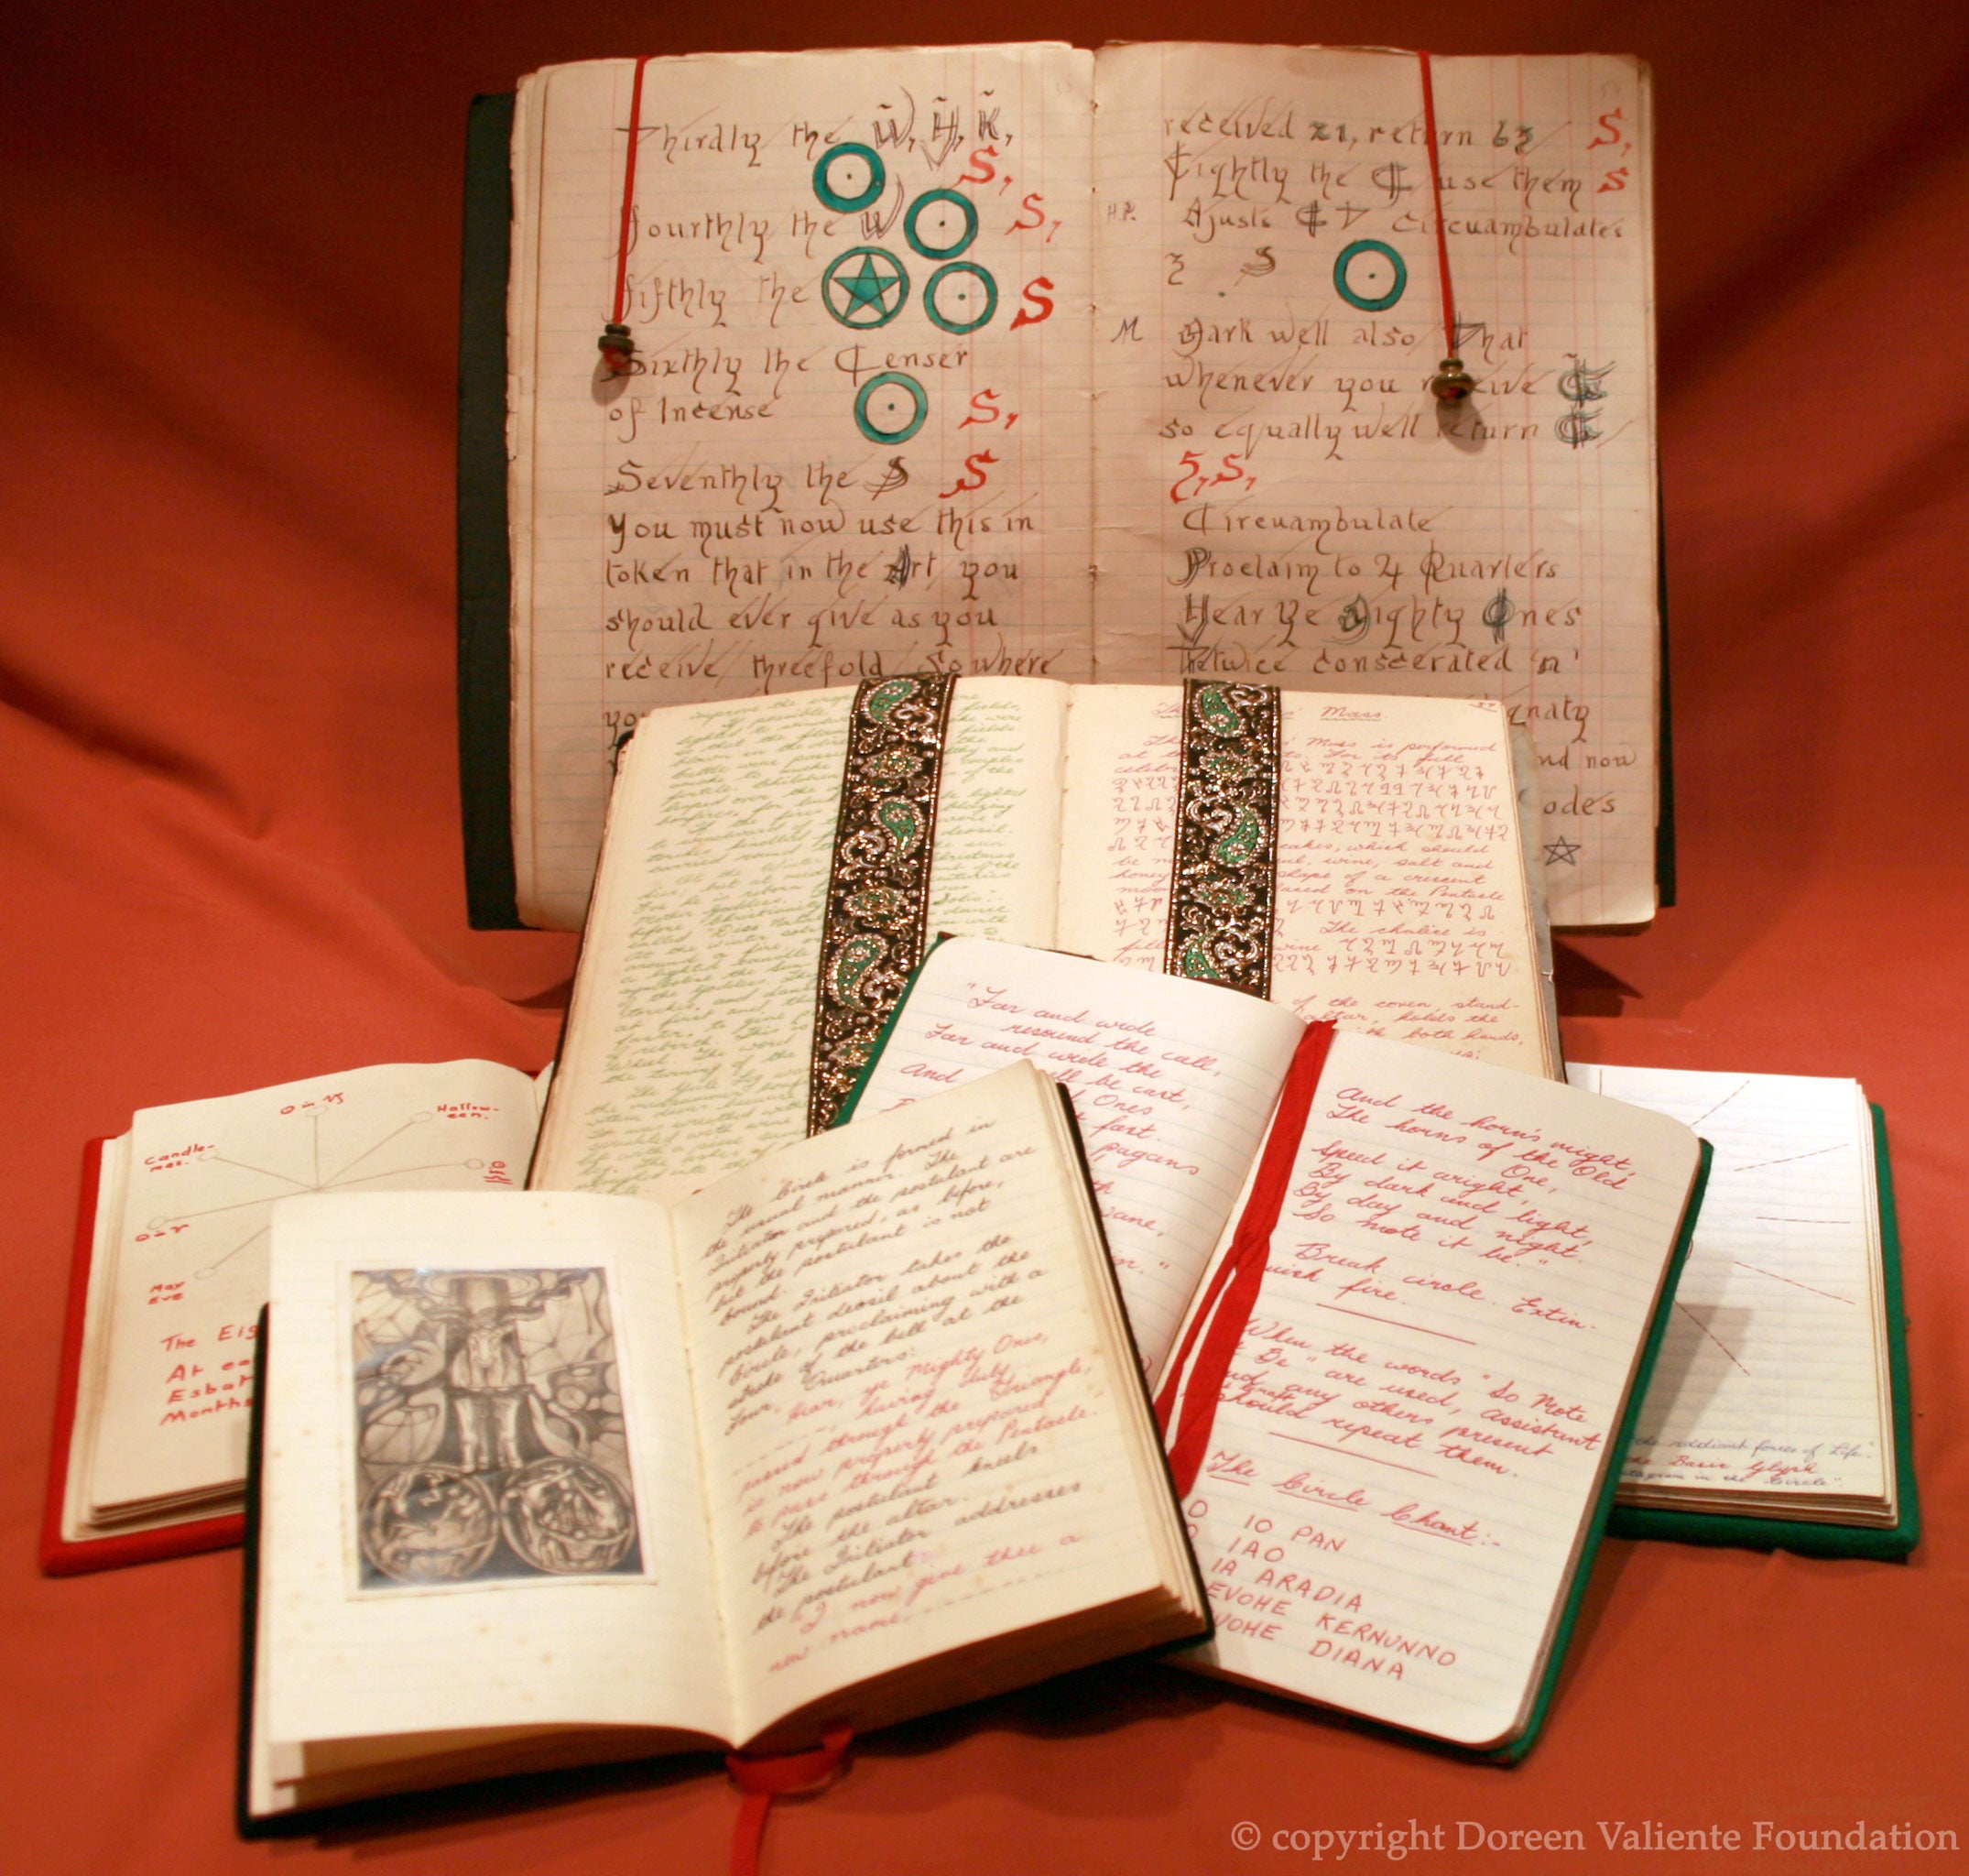 Ritual books owned by Doreen Valiente